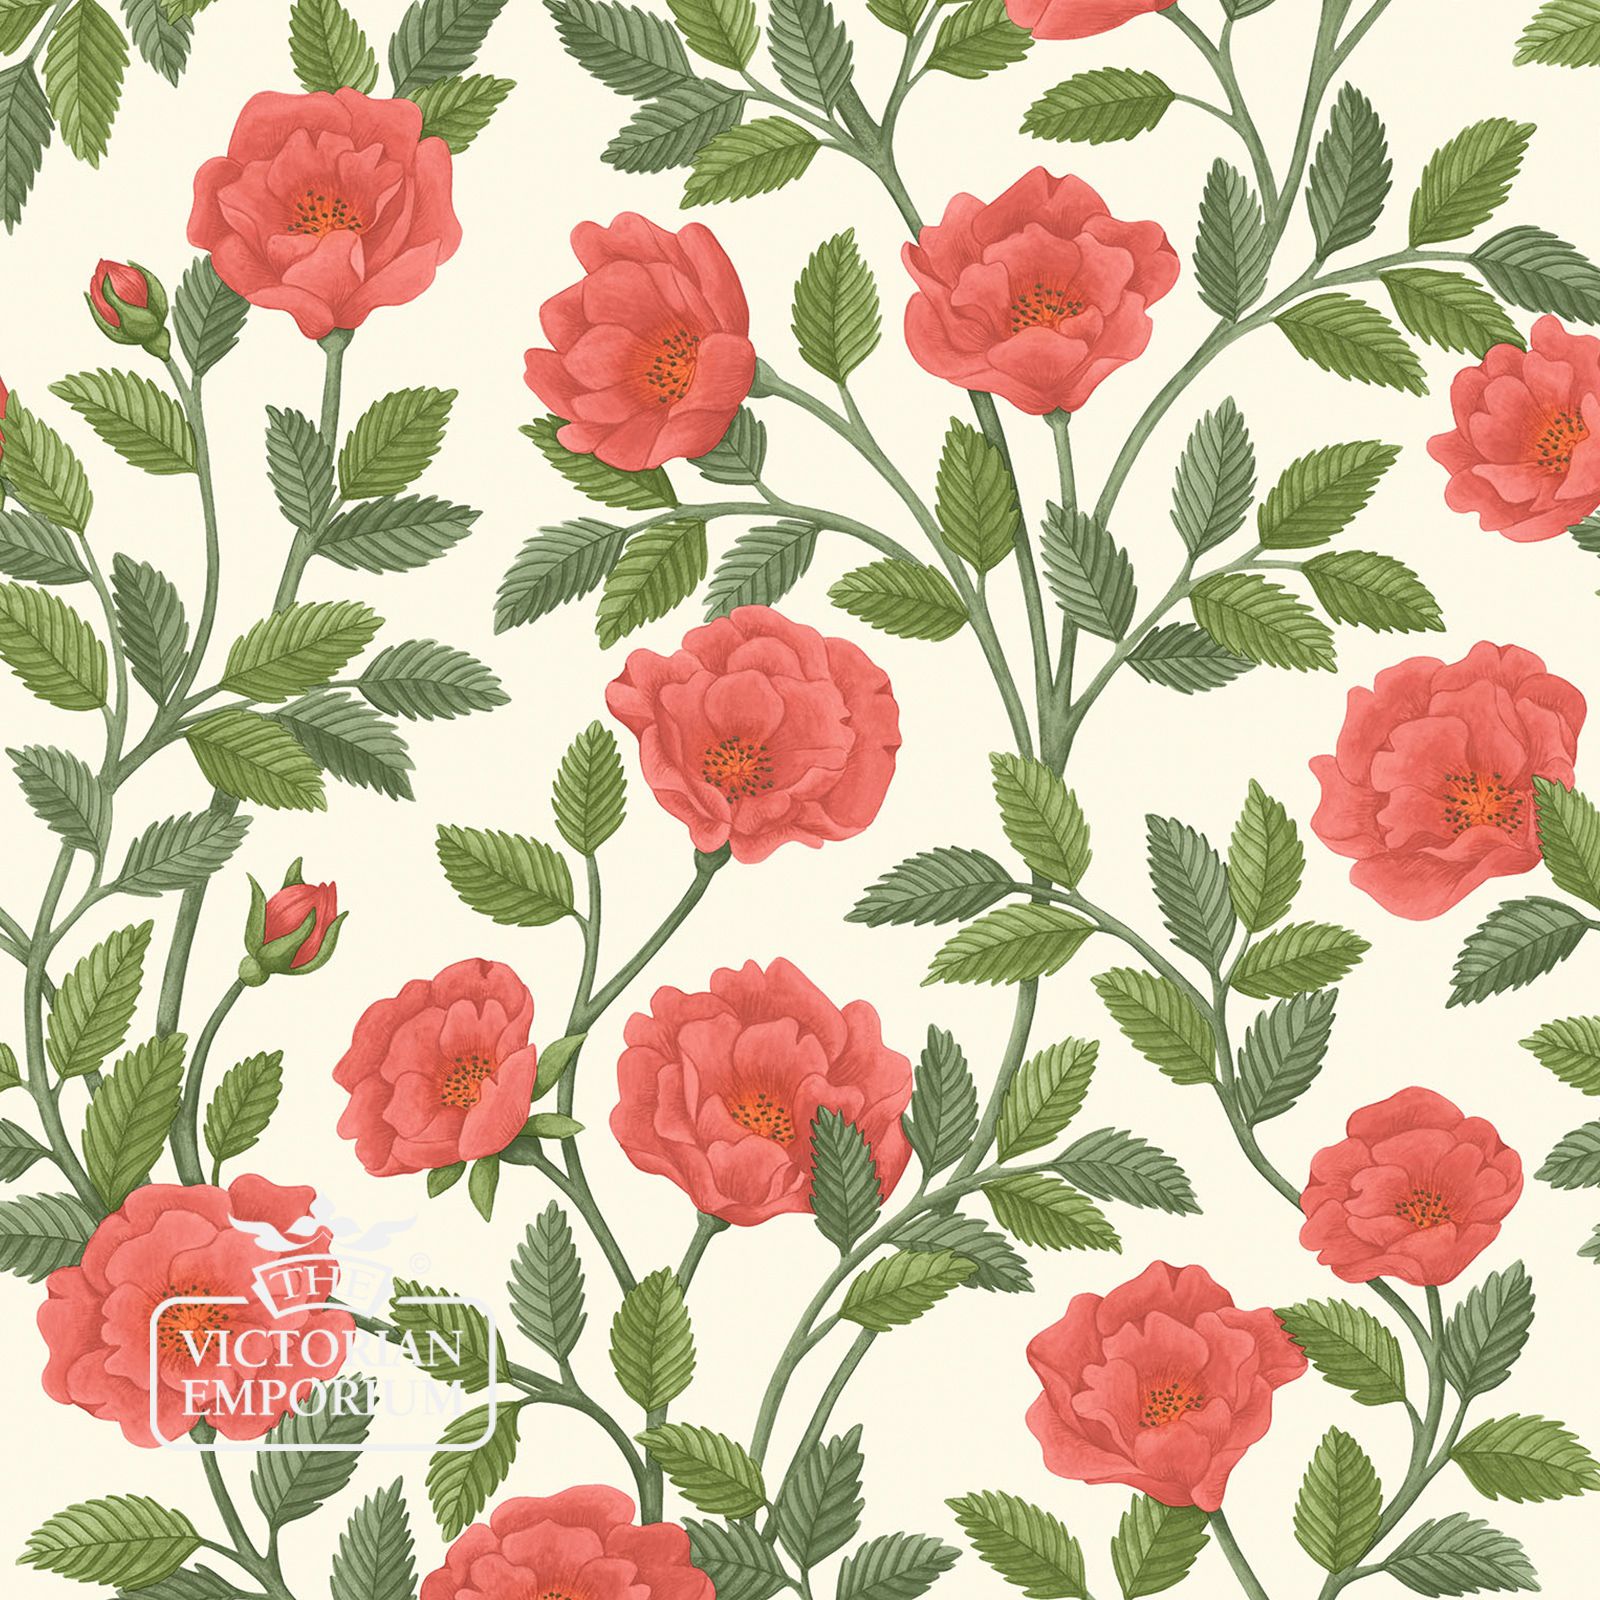 Hampton Roses wallpaper in a choice of Rouge, Rose, Marigold and Cream